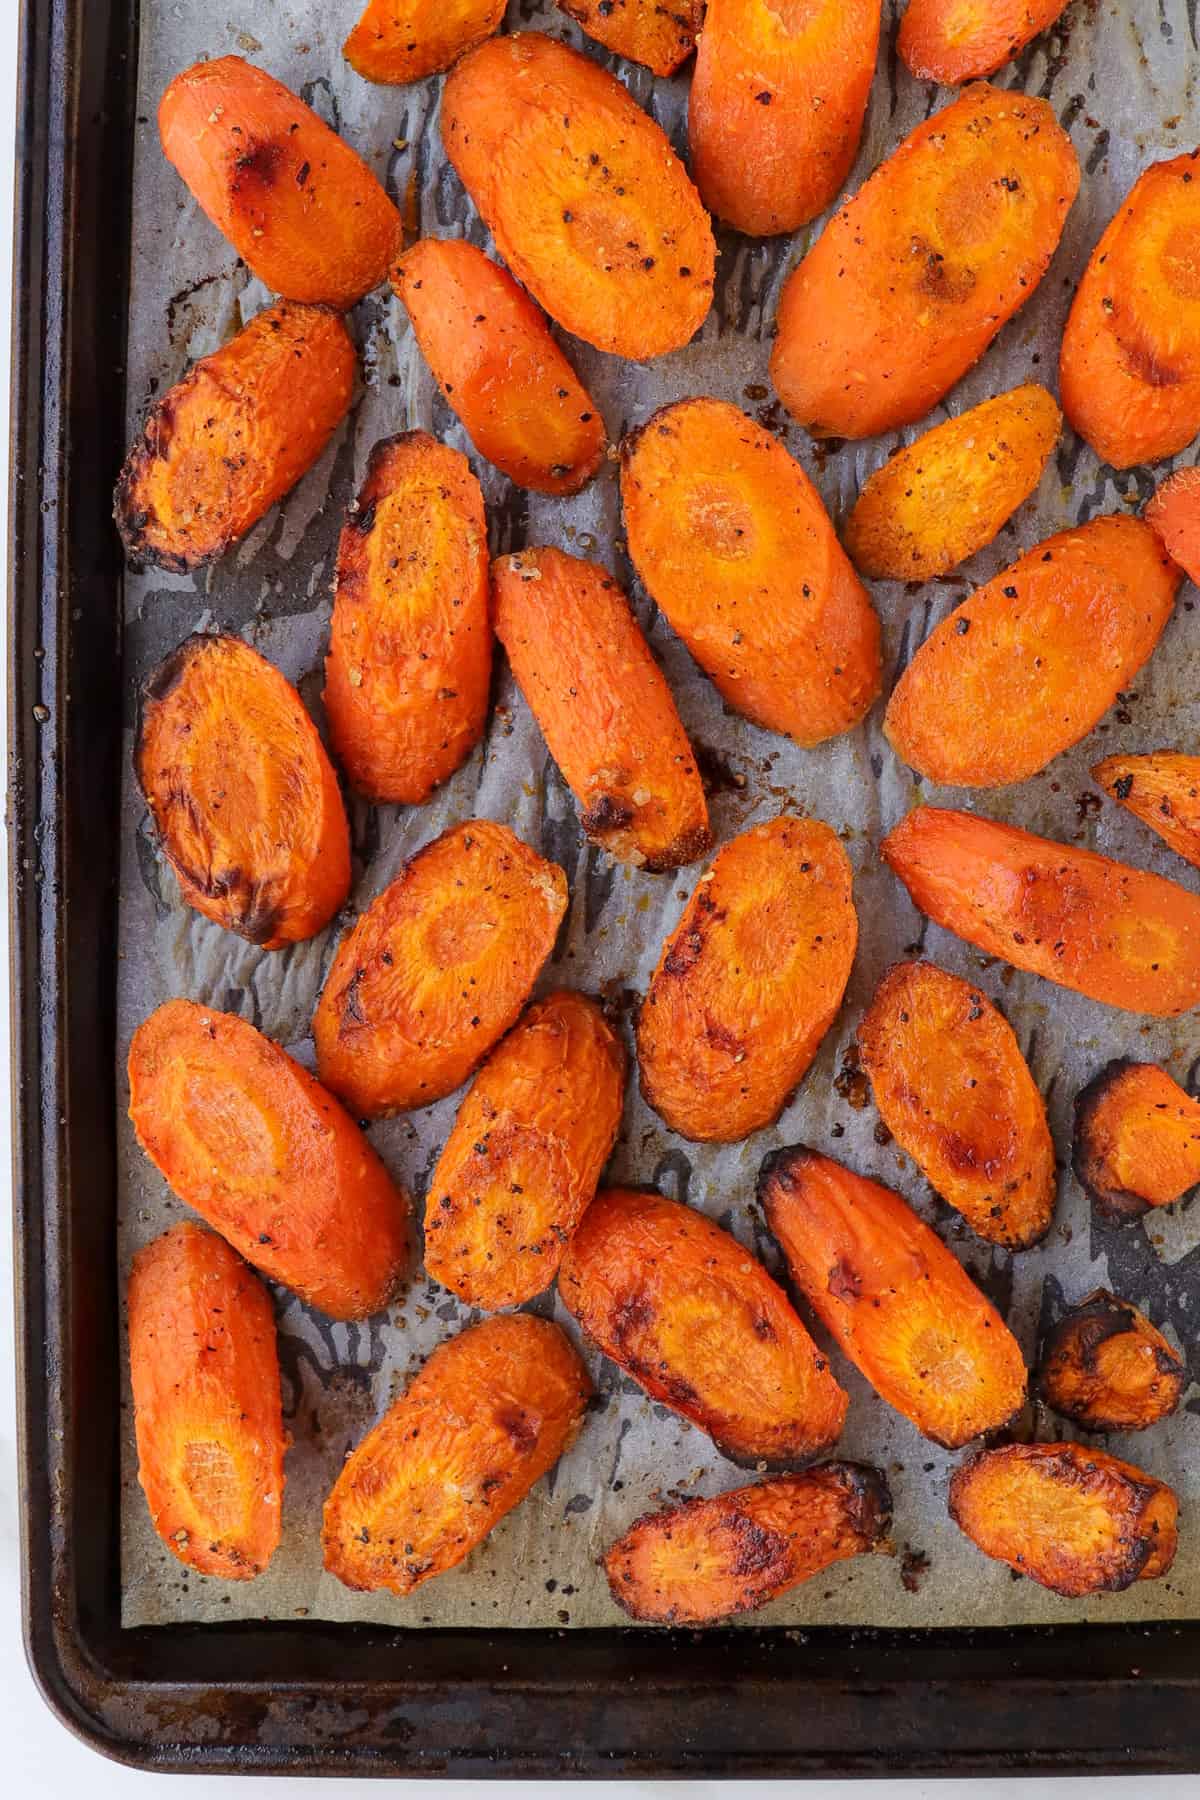 Roasted carrot slices on baking tray.